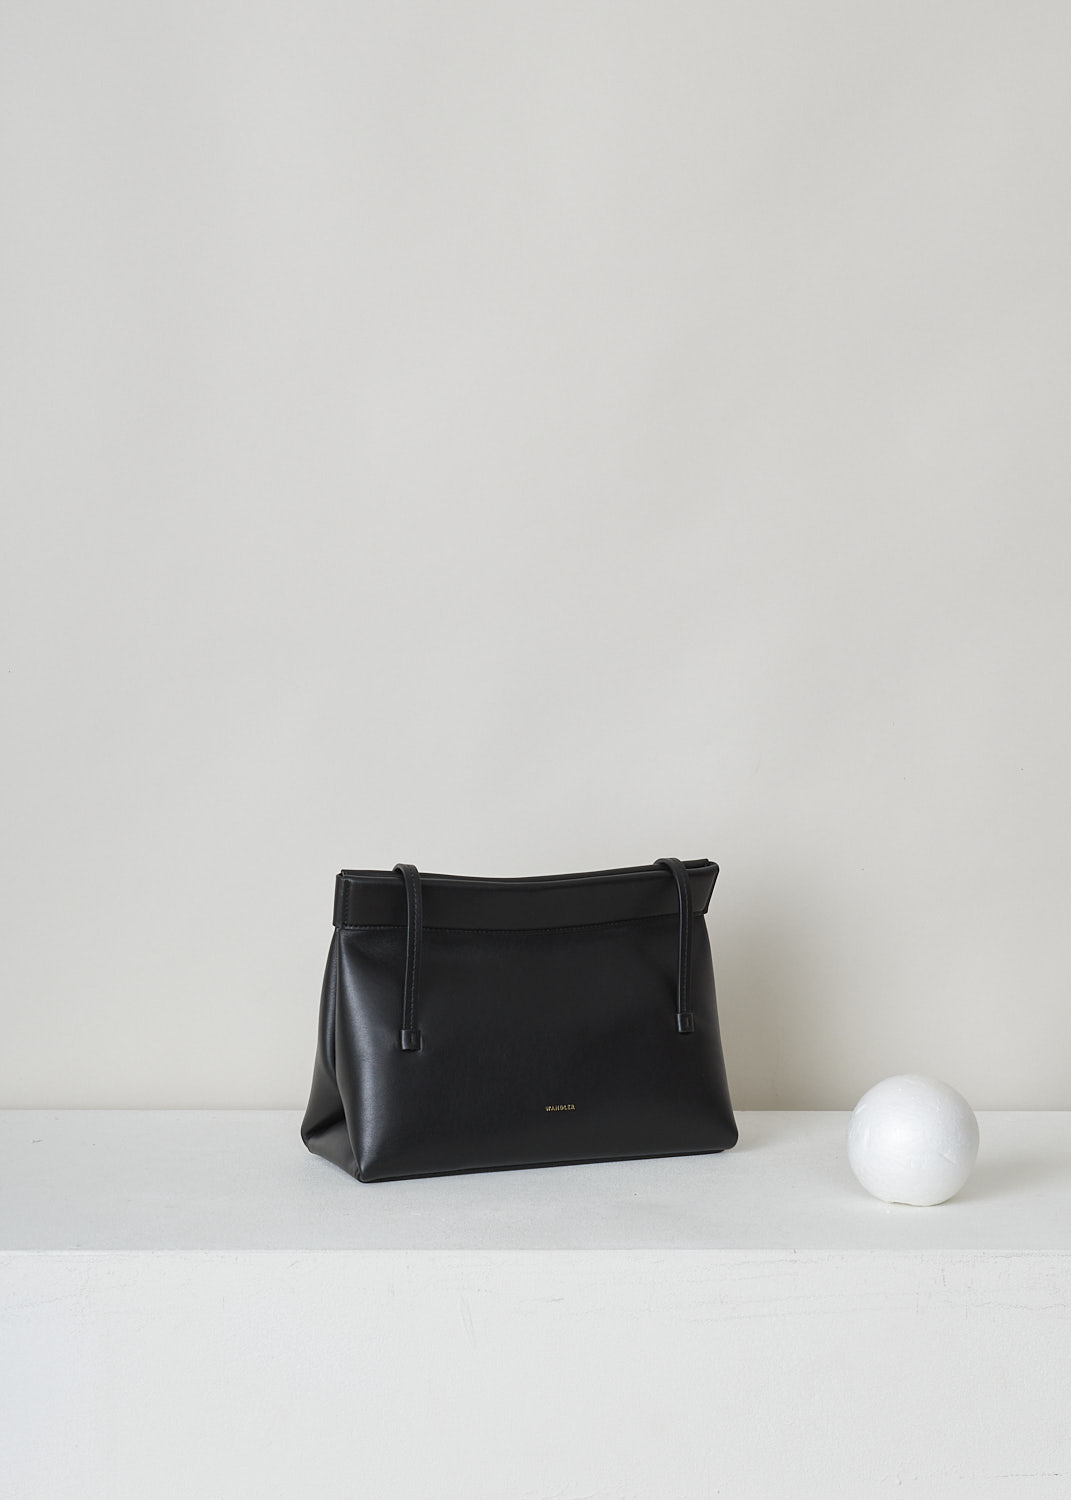 WANDLER, JOANNA MINI BAG IN BLACK, JOANNA_BAG_MINI_BLACK_22108100391, Black, Side, This black Joanna mini hand bag has slim top handles. The magnetic strip closure opens up to the single spacious compartment. On the front, the brand's lettering can be found in gold.  

